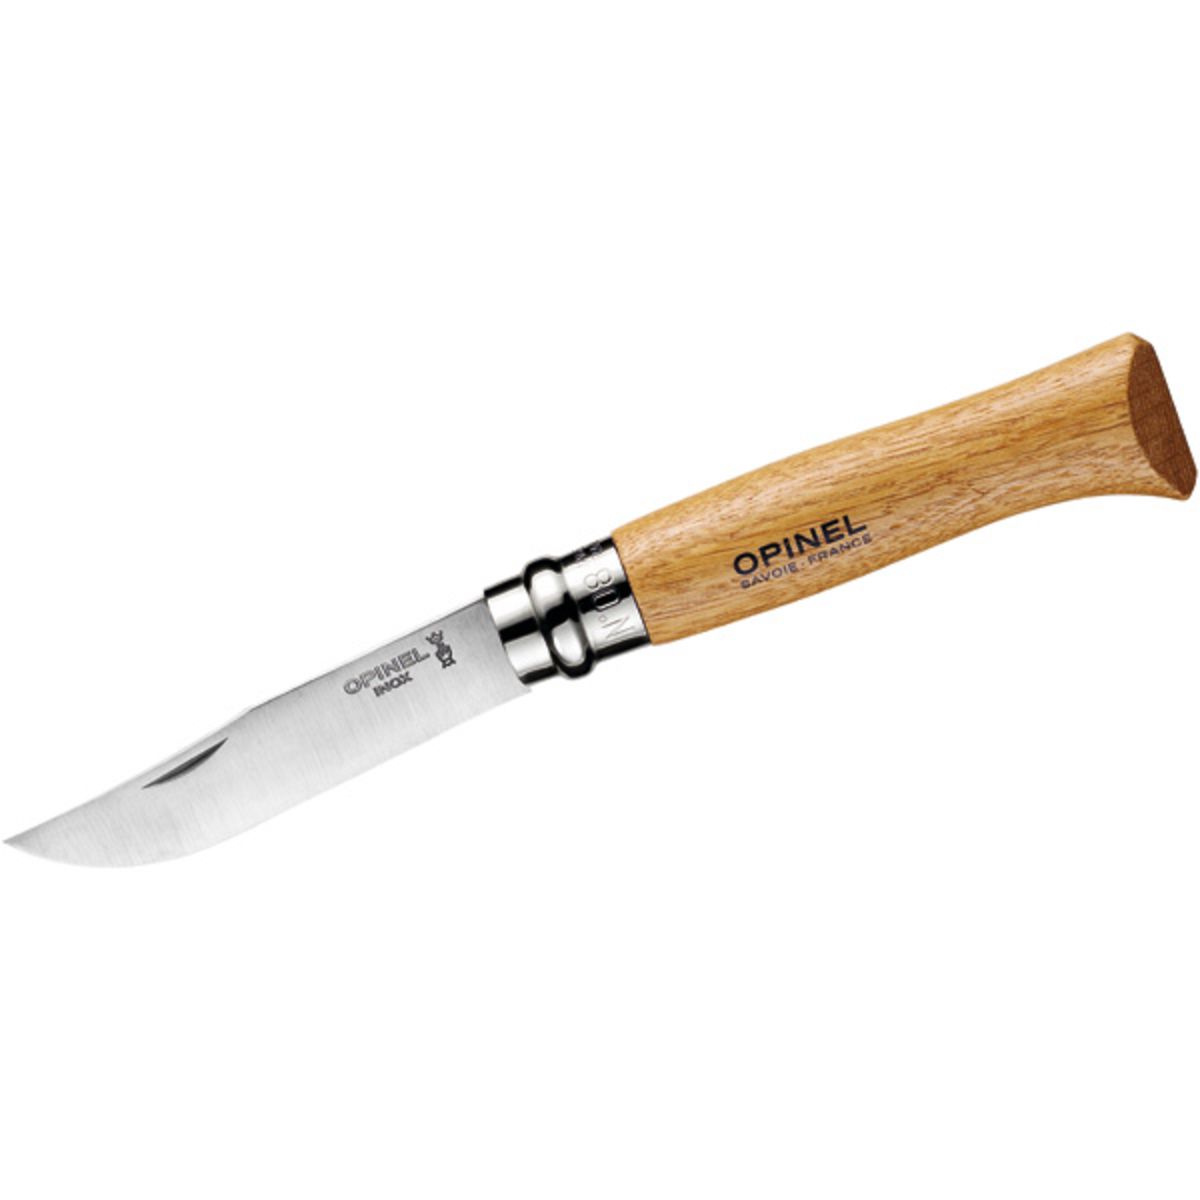 Image of Opinel Coltello quercia INOX, n. 8